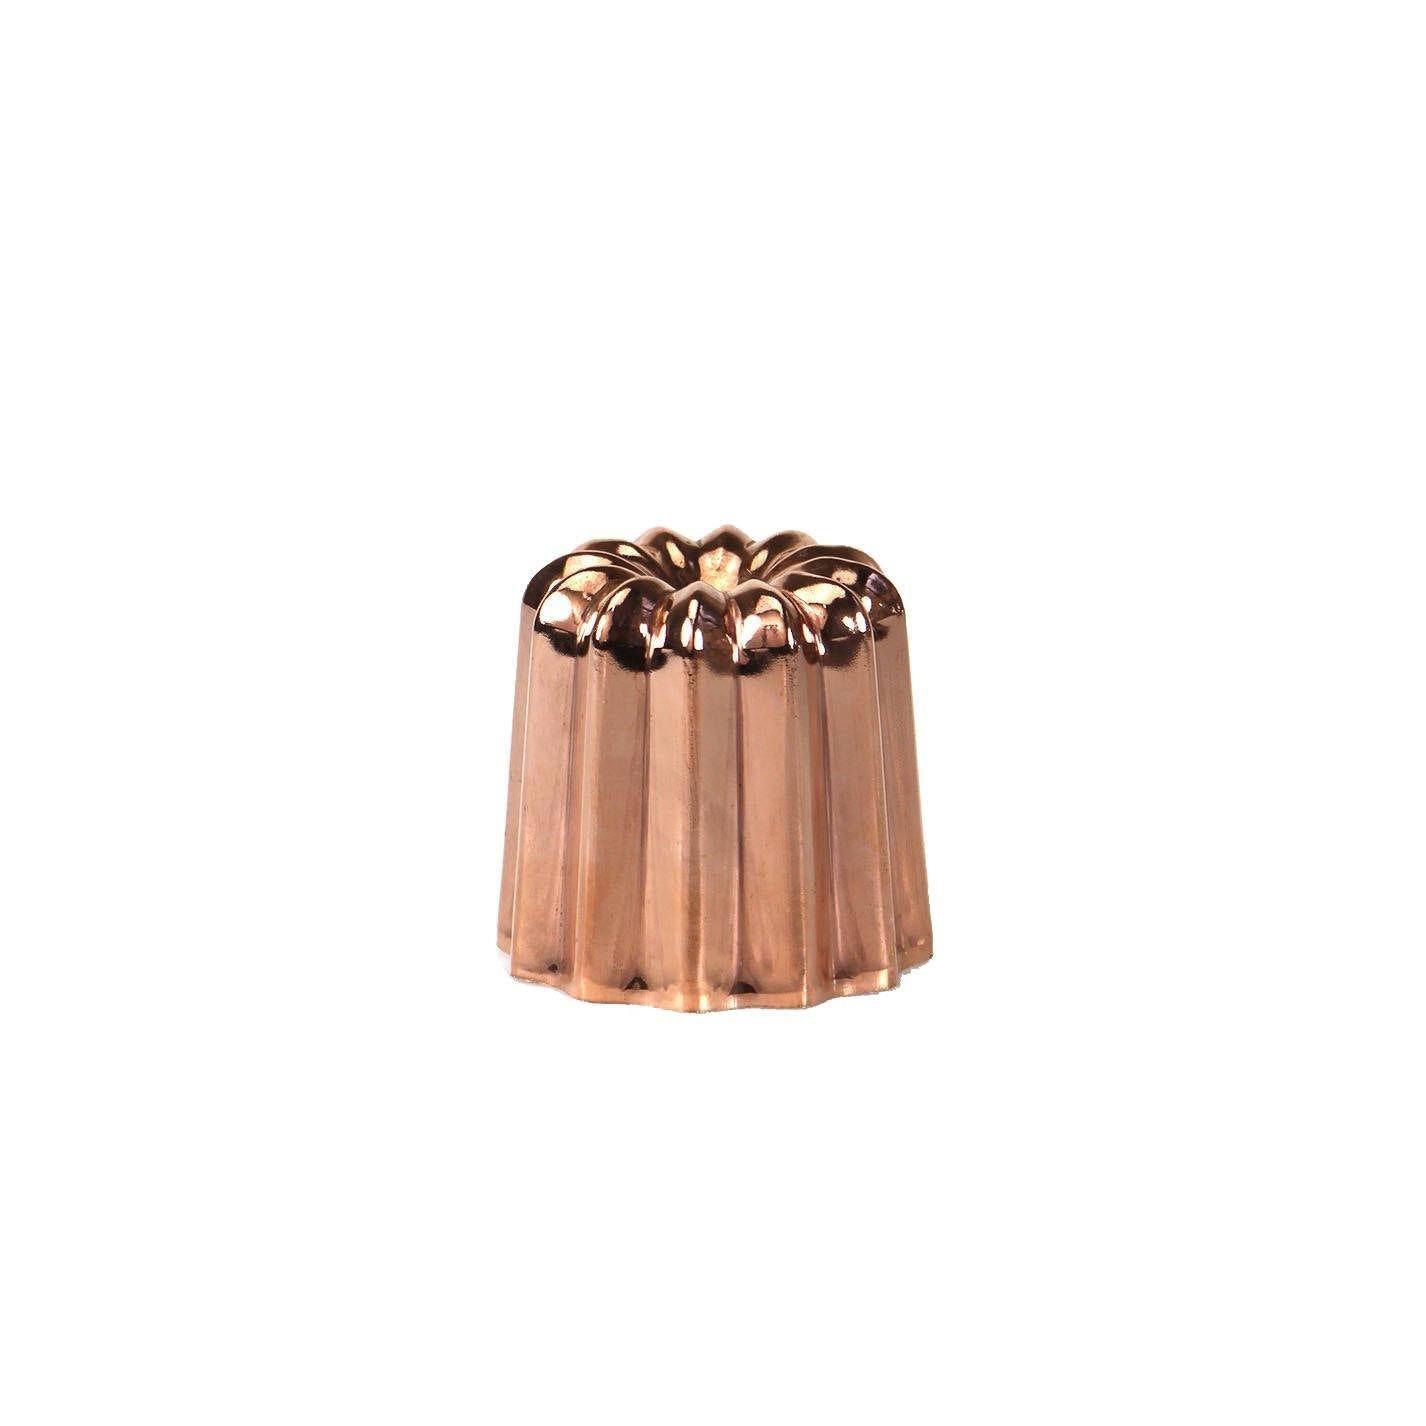 GUSTA SUPPLIES Copper Canele Mould with Tinned Interior